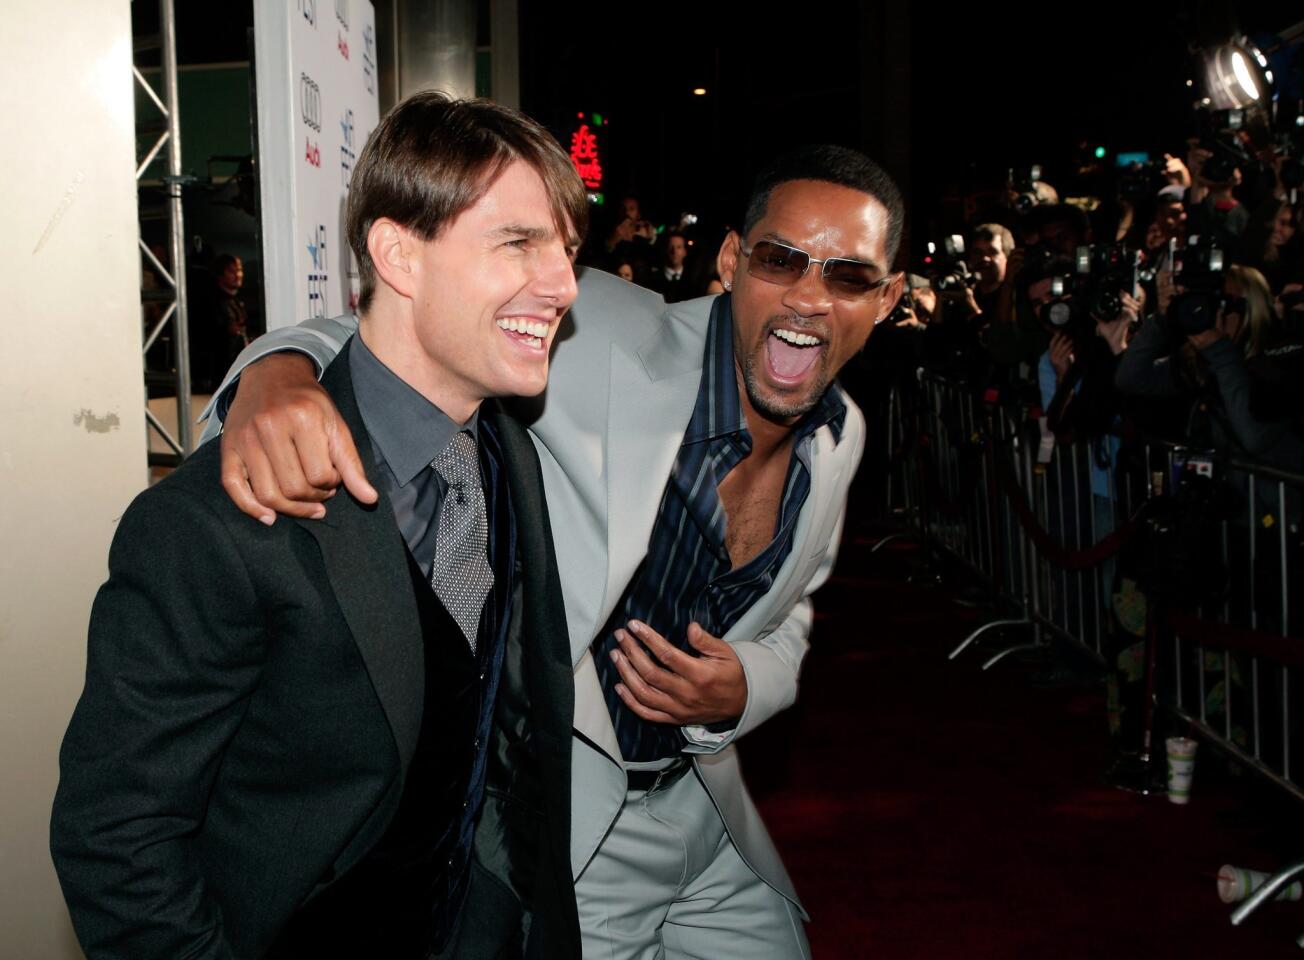 Friendship with Tom Cruise